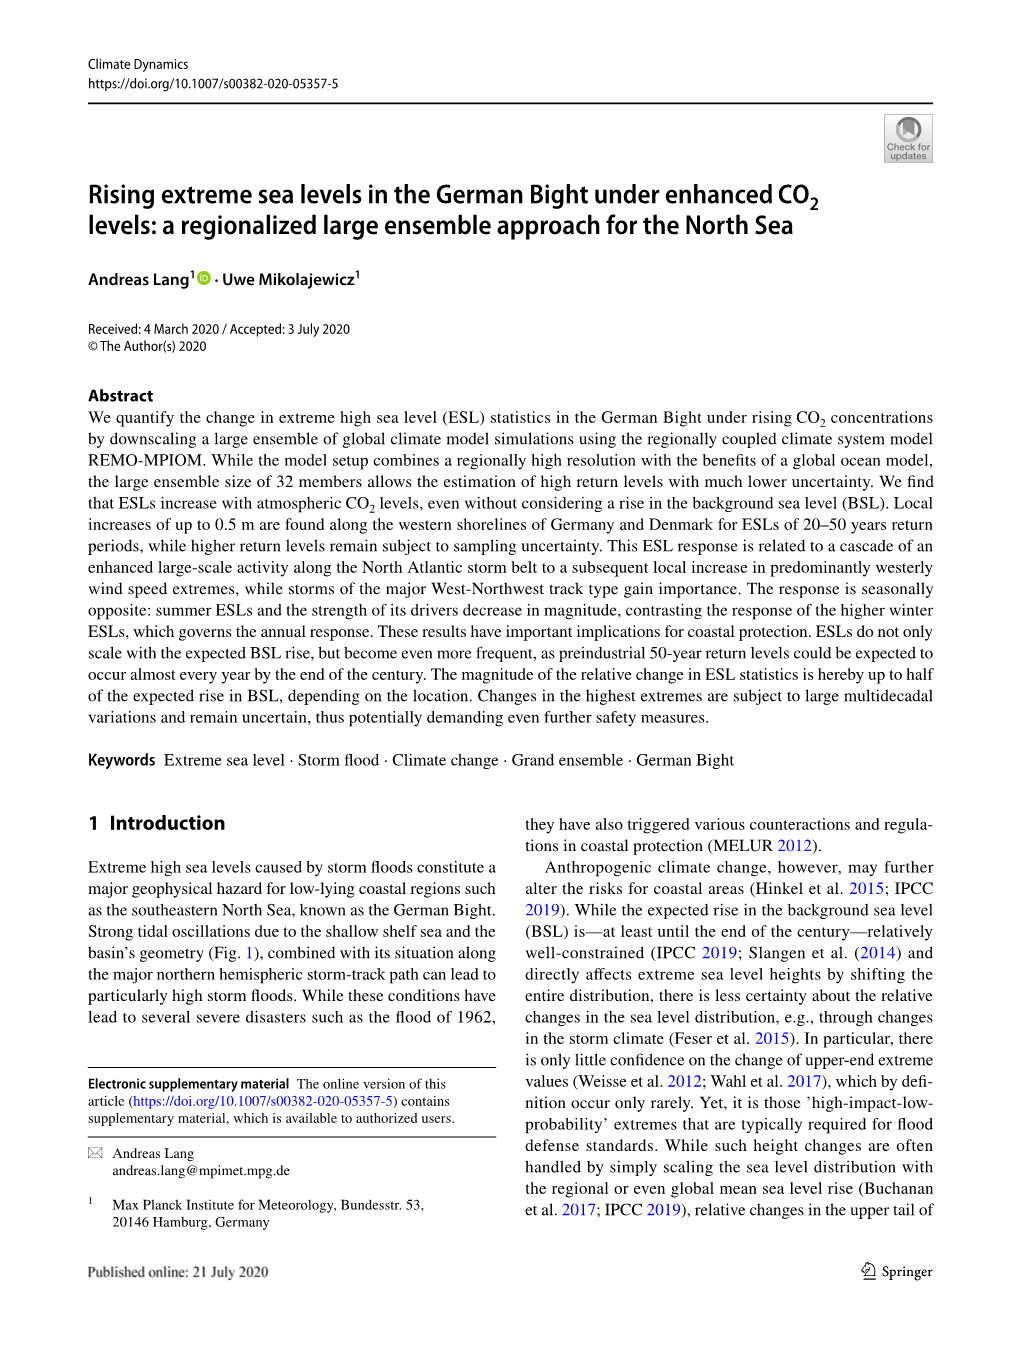 Rising Extreme Sea Levels in the German Bight Under Enhanced Levels: a Regionalized Large Ensem…